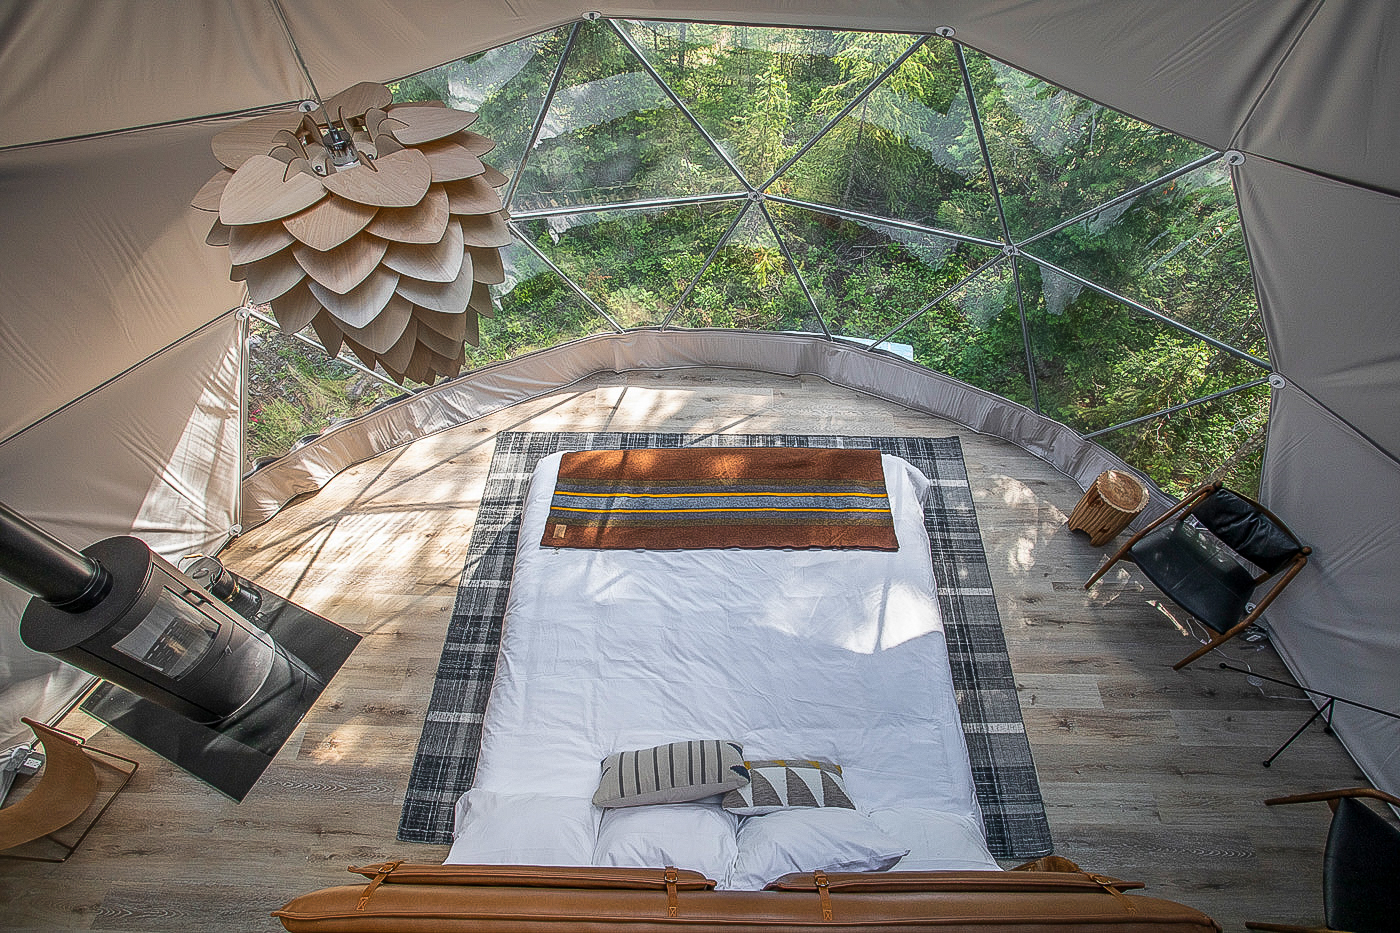 inside of the geodesic with a bed, a stove and an armchair